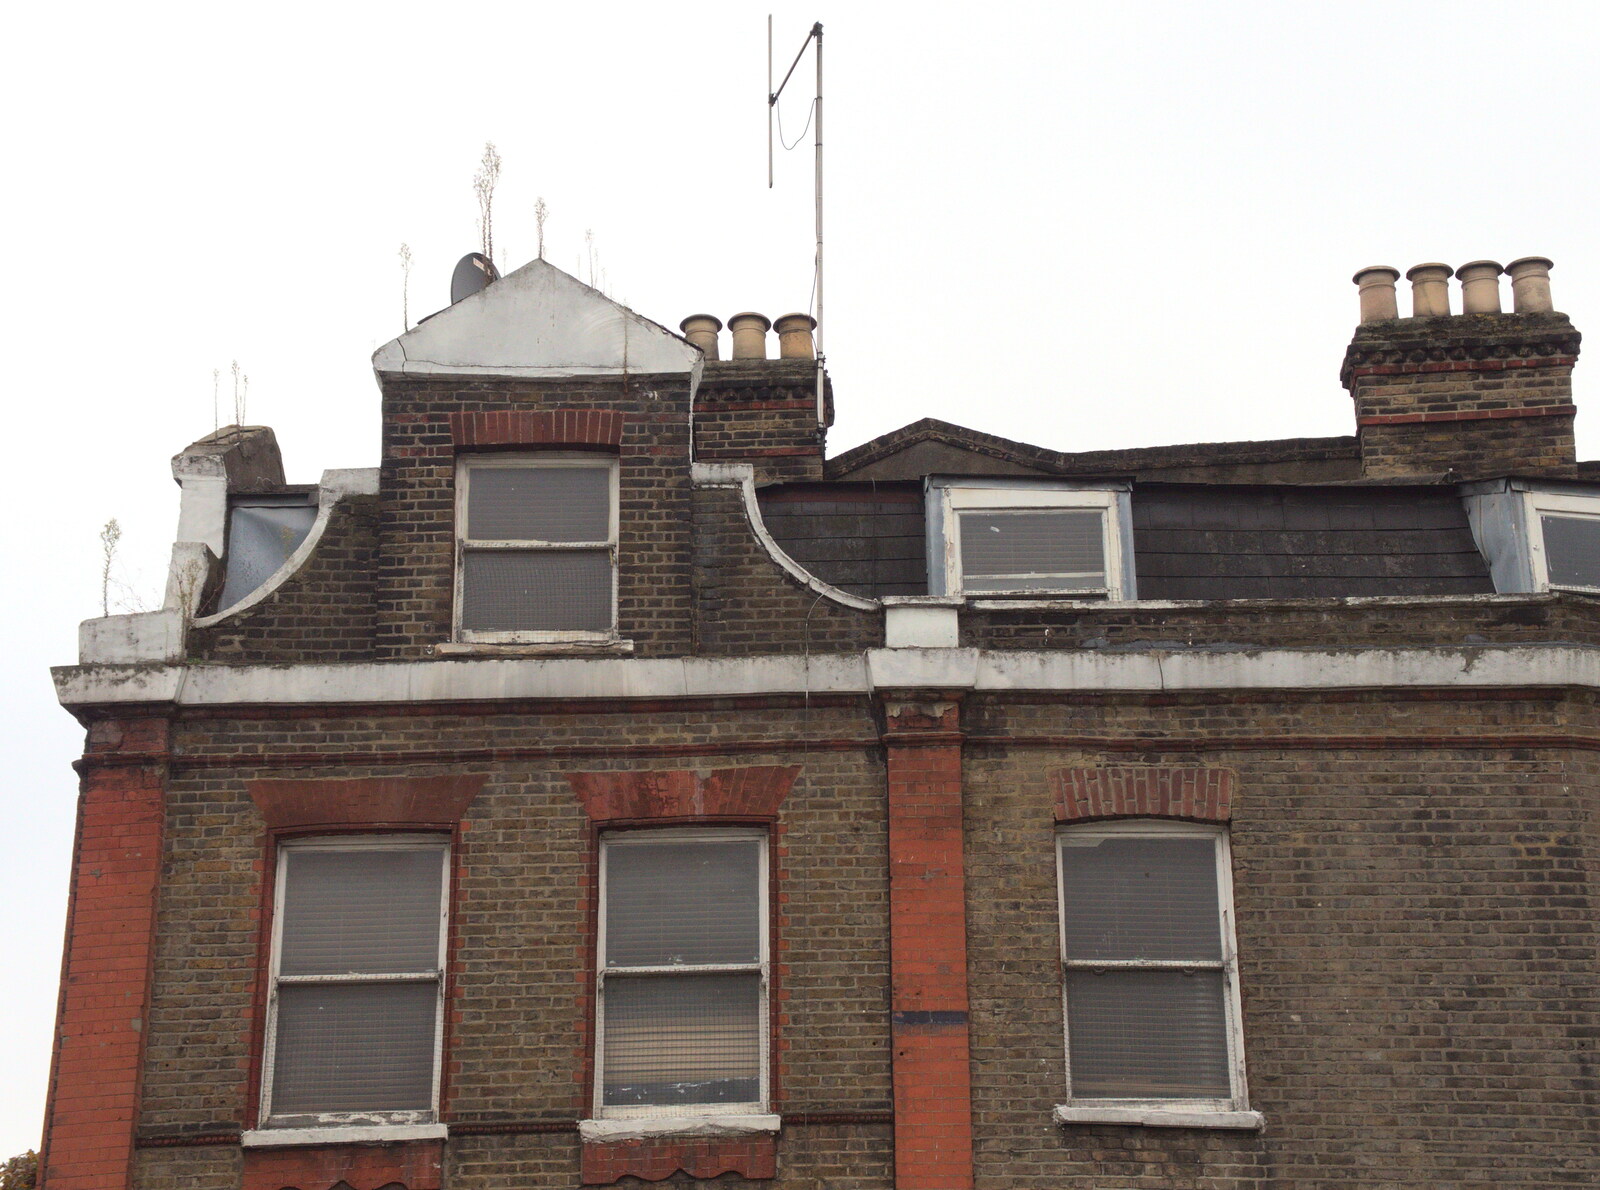 Plants grow out of a building roof from Droidcon 2016, Islington, London - 27th October 2016